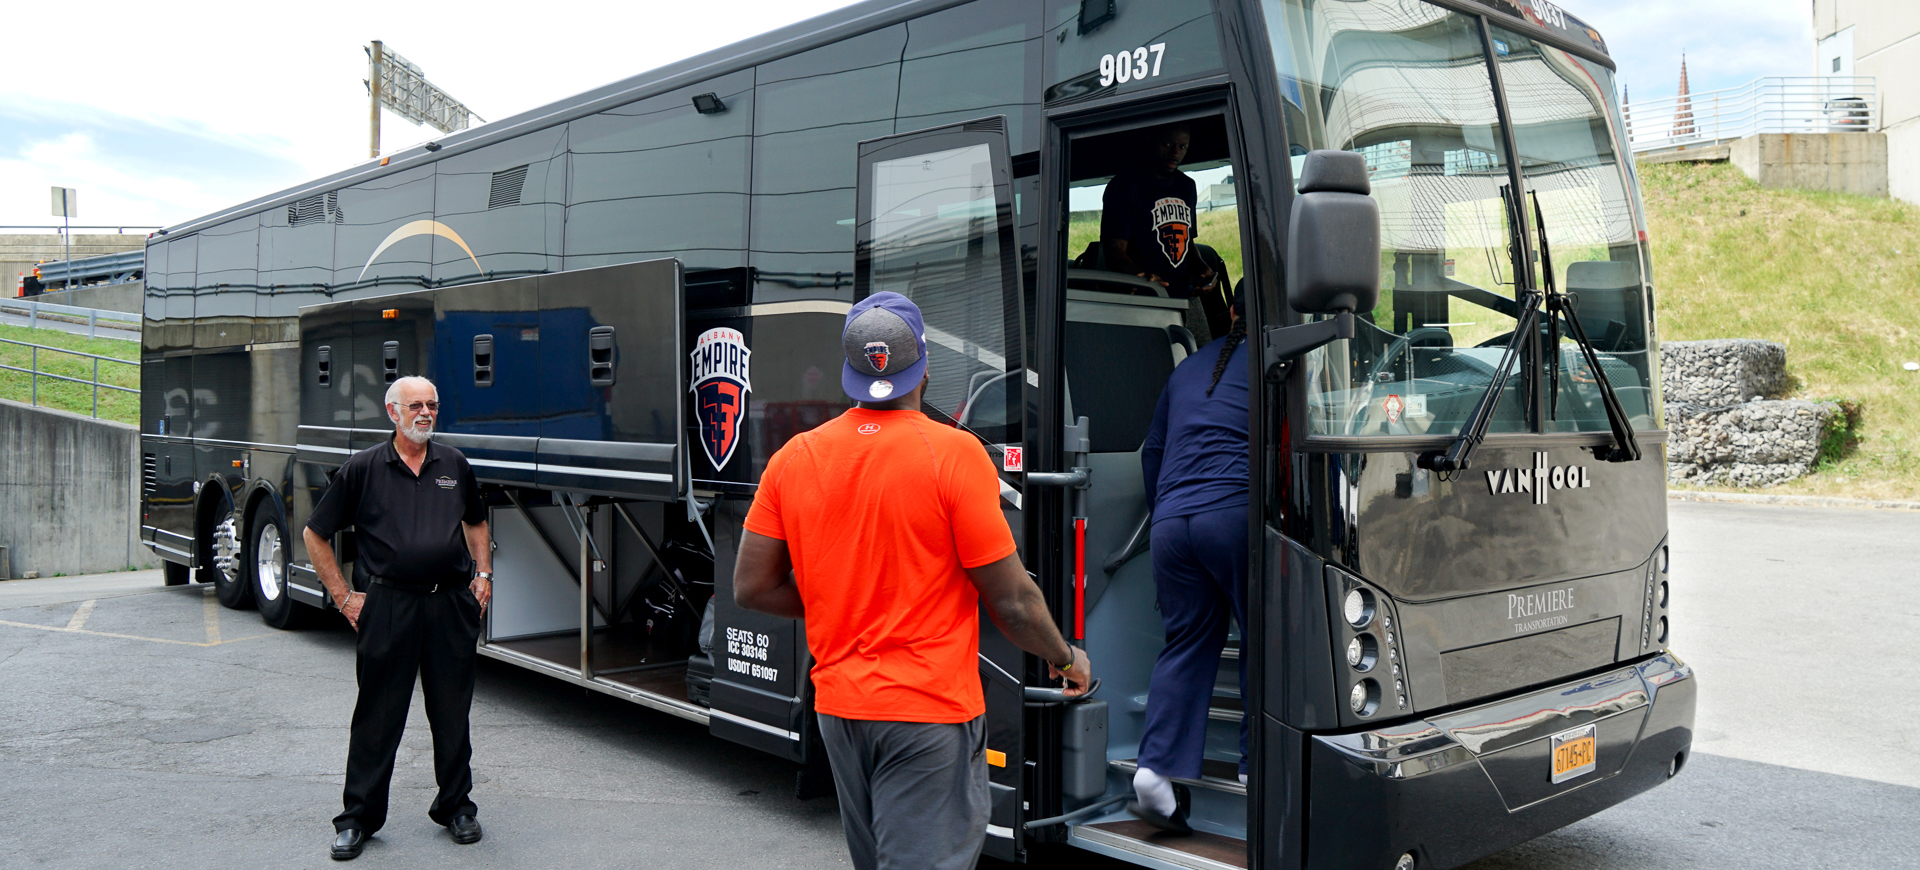 Sports team getting on Premiere bus with driver